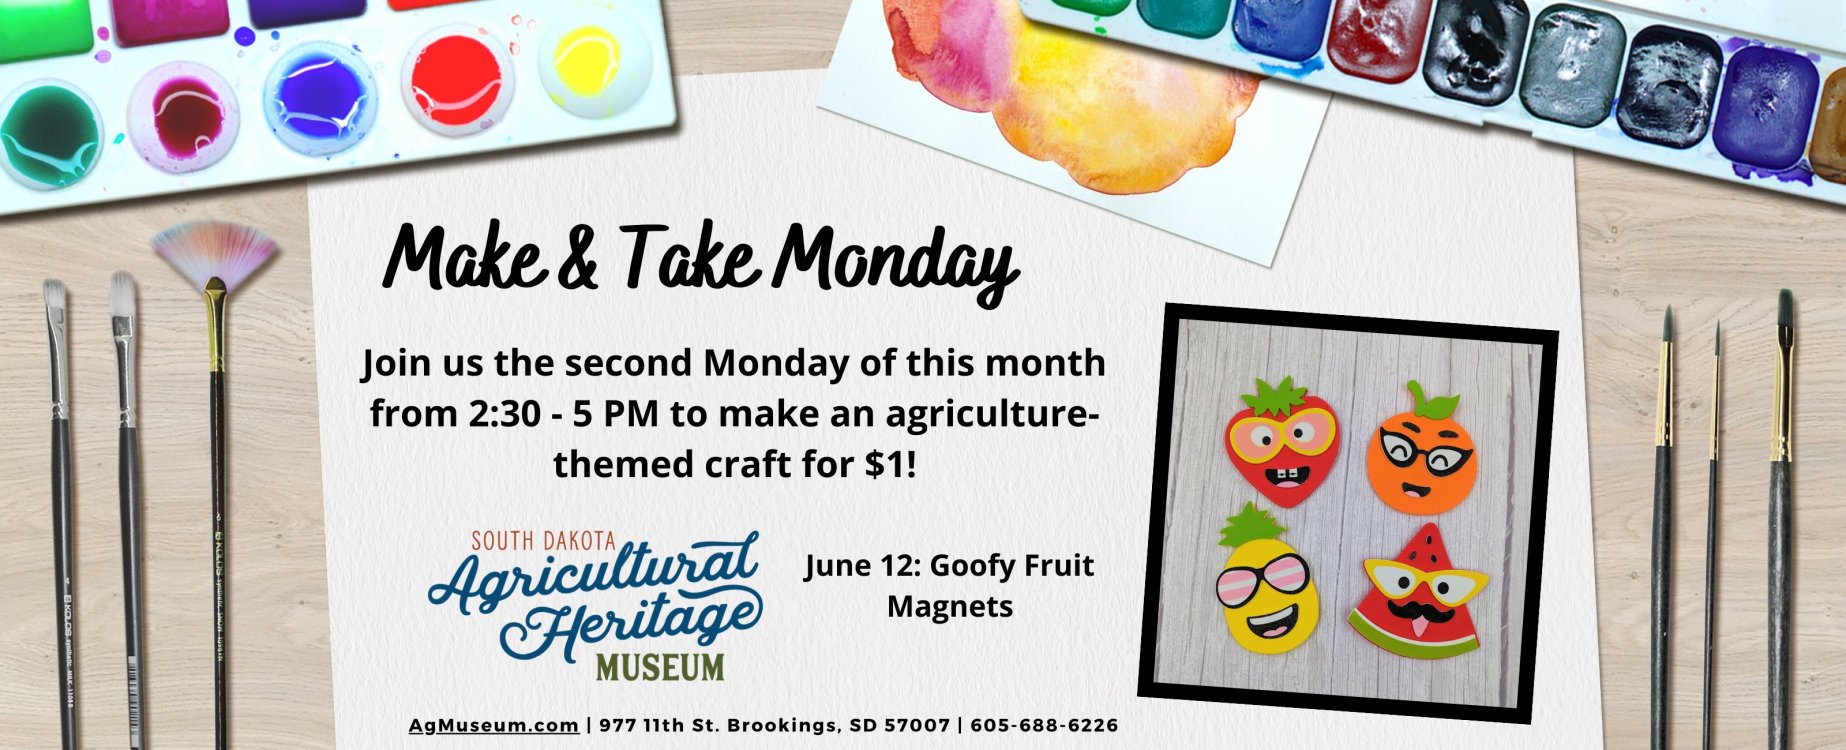 Make & Take Monday Join us on the 2nd Monday of each month from 2:30 to 5 PM to make an agriculture-themed craft for $1!  June 12 Craft: Goofy Fruit Magnets.  agmuseum.com.  977 11th St. Brookings, SD 57007. 605-688-6226